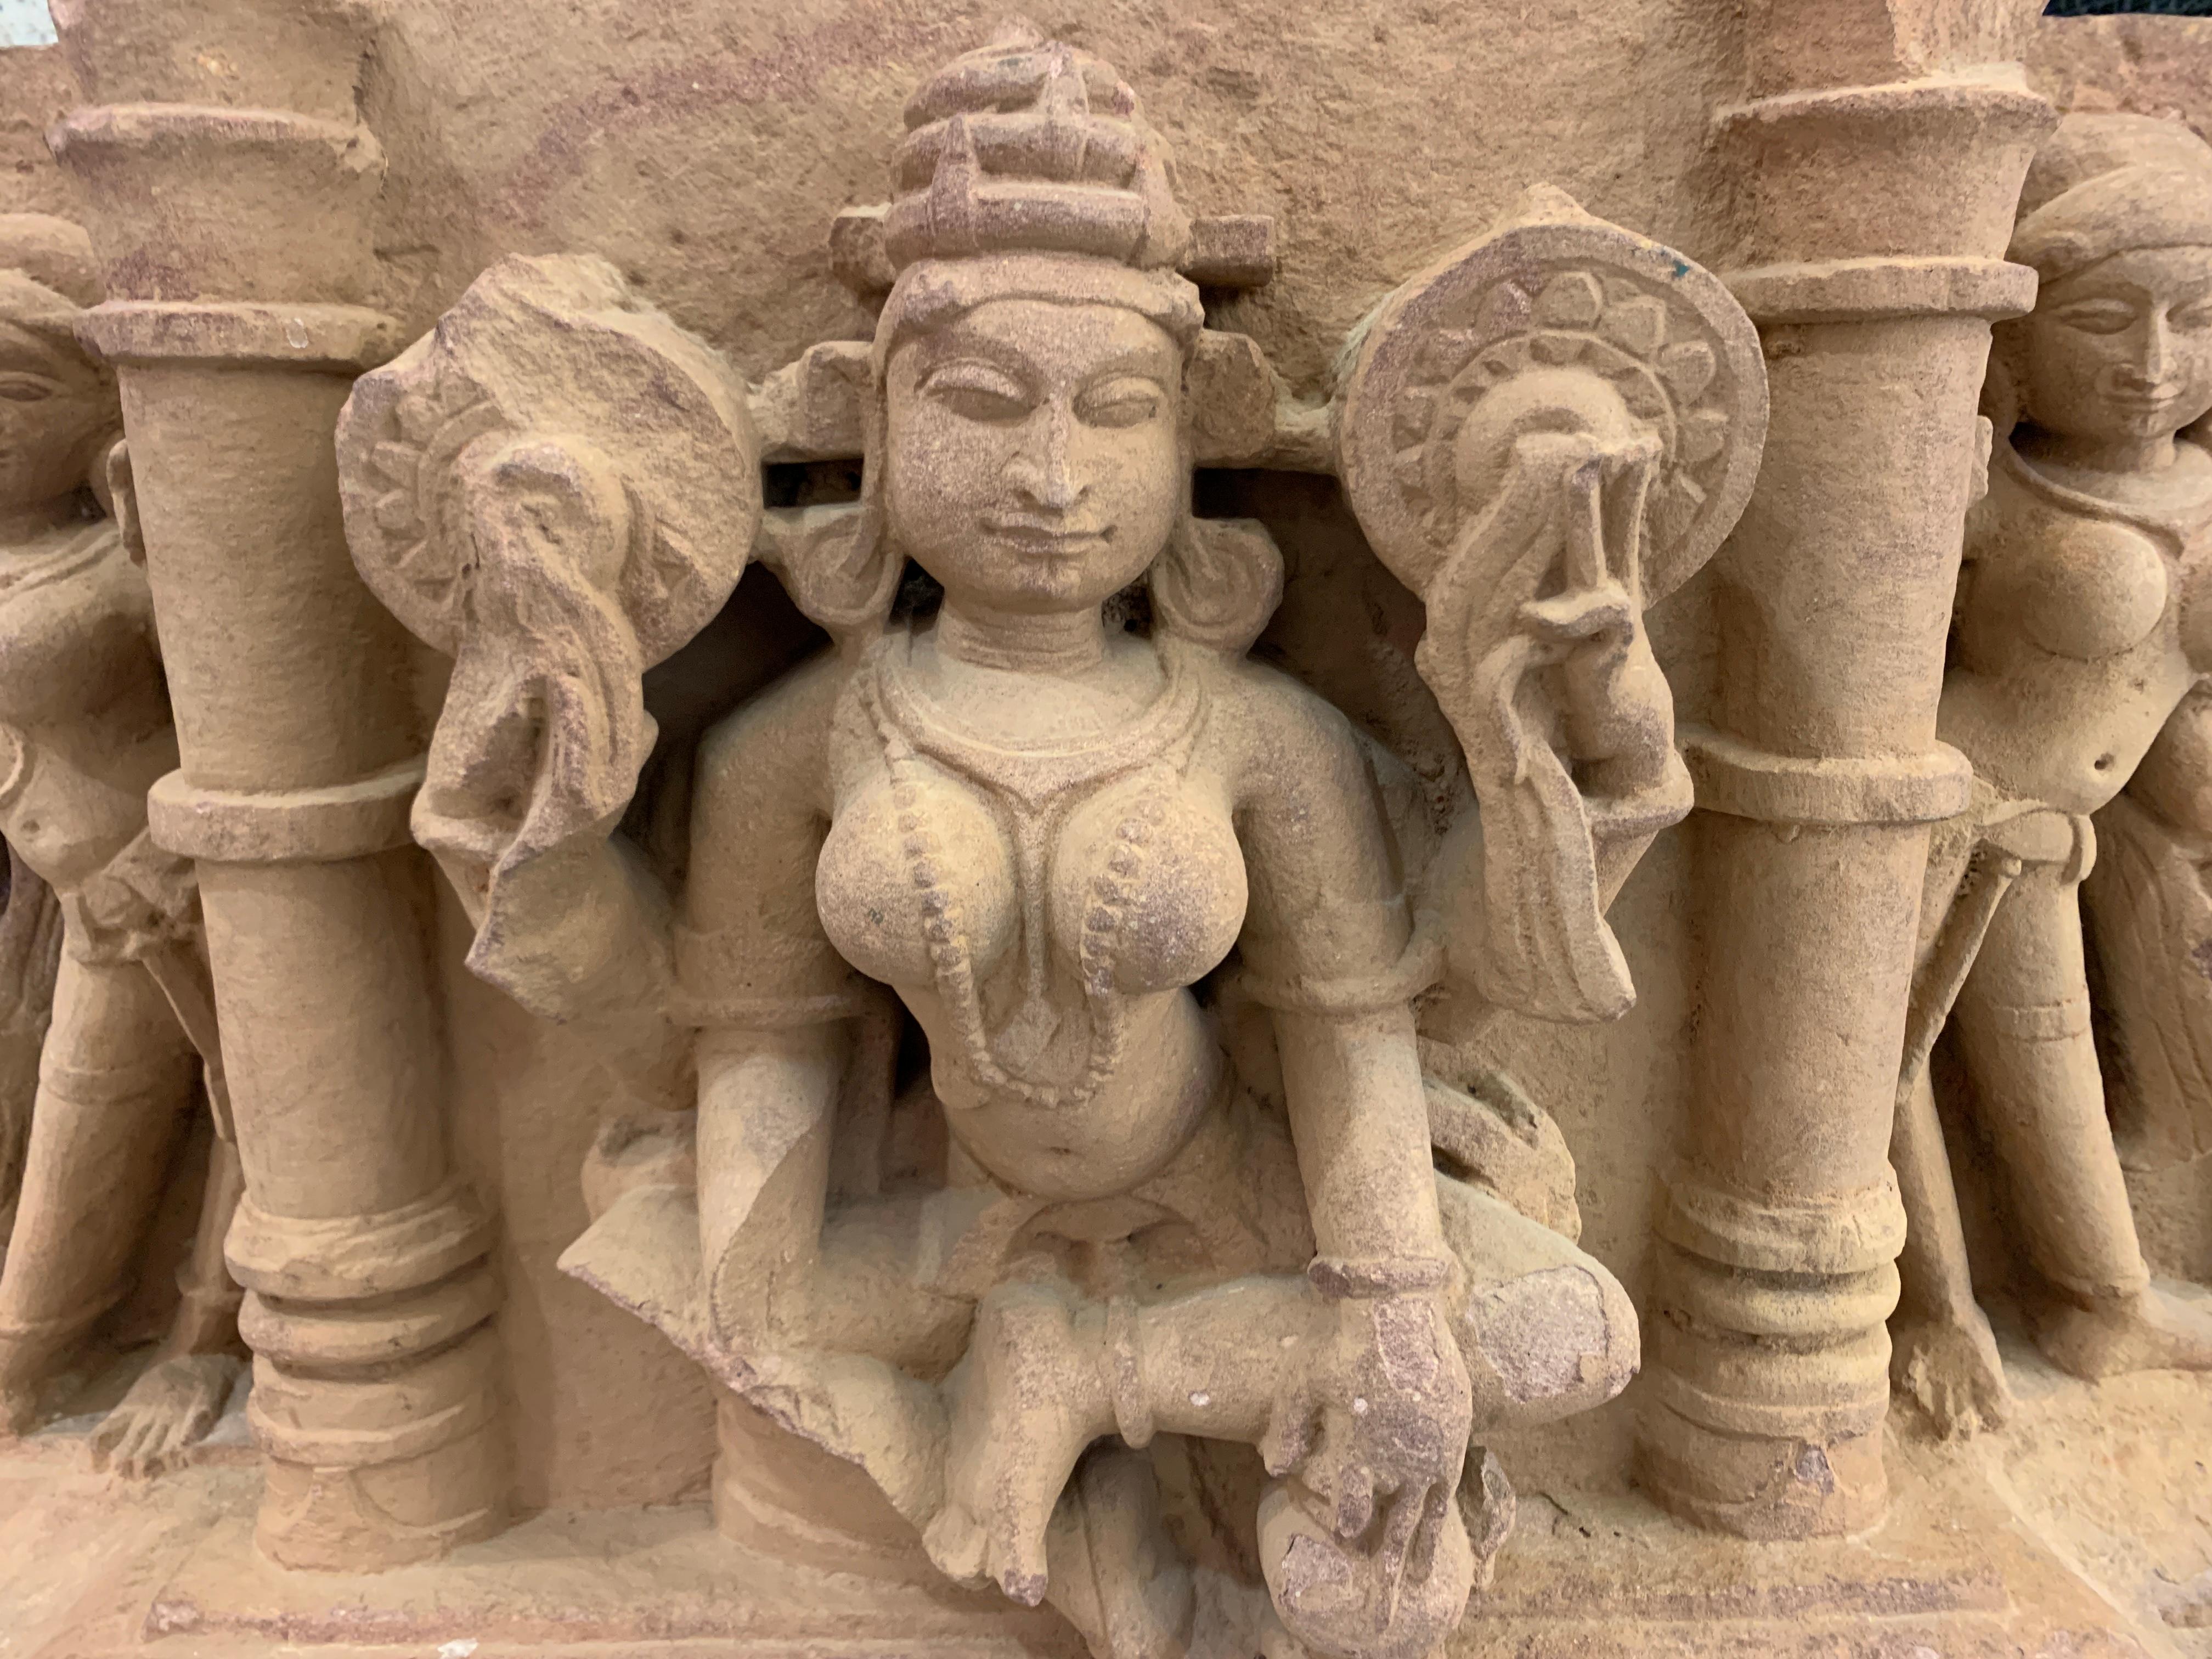 A large and impressive Indian carved sandstone architectural frieze featuring a central image of the Hindu goddess Lakshmi flanked by two attendants, Central India, 10th-11th century.
Lakshmi, the Hindu goddess of love, wealth and prosperity, is